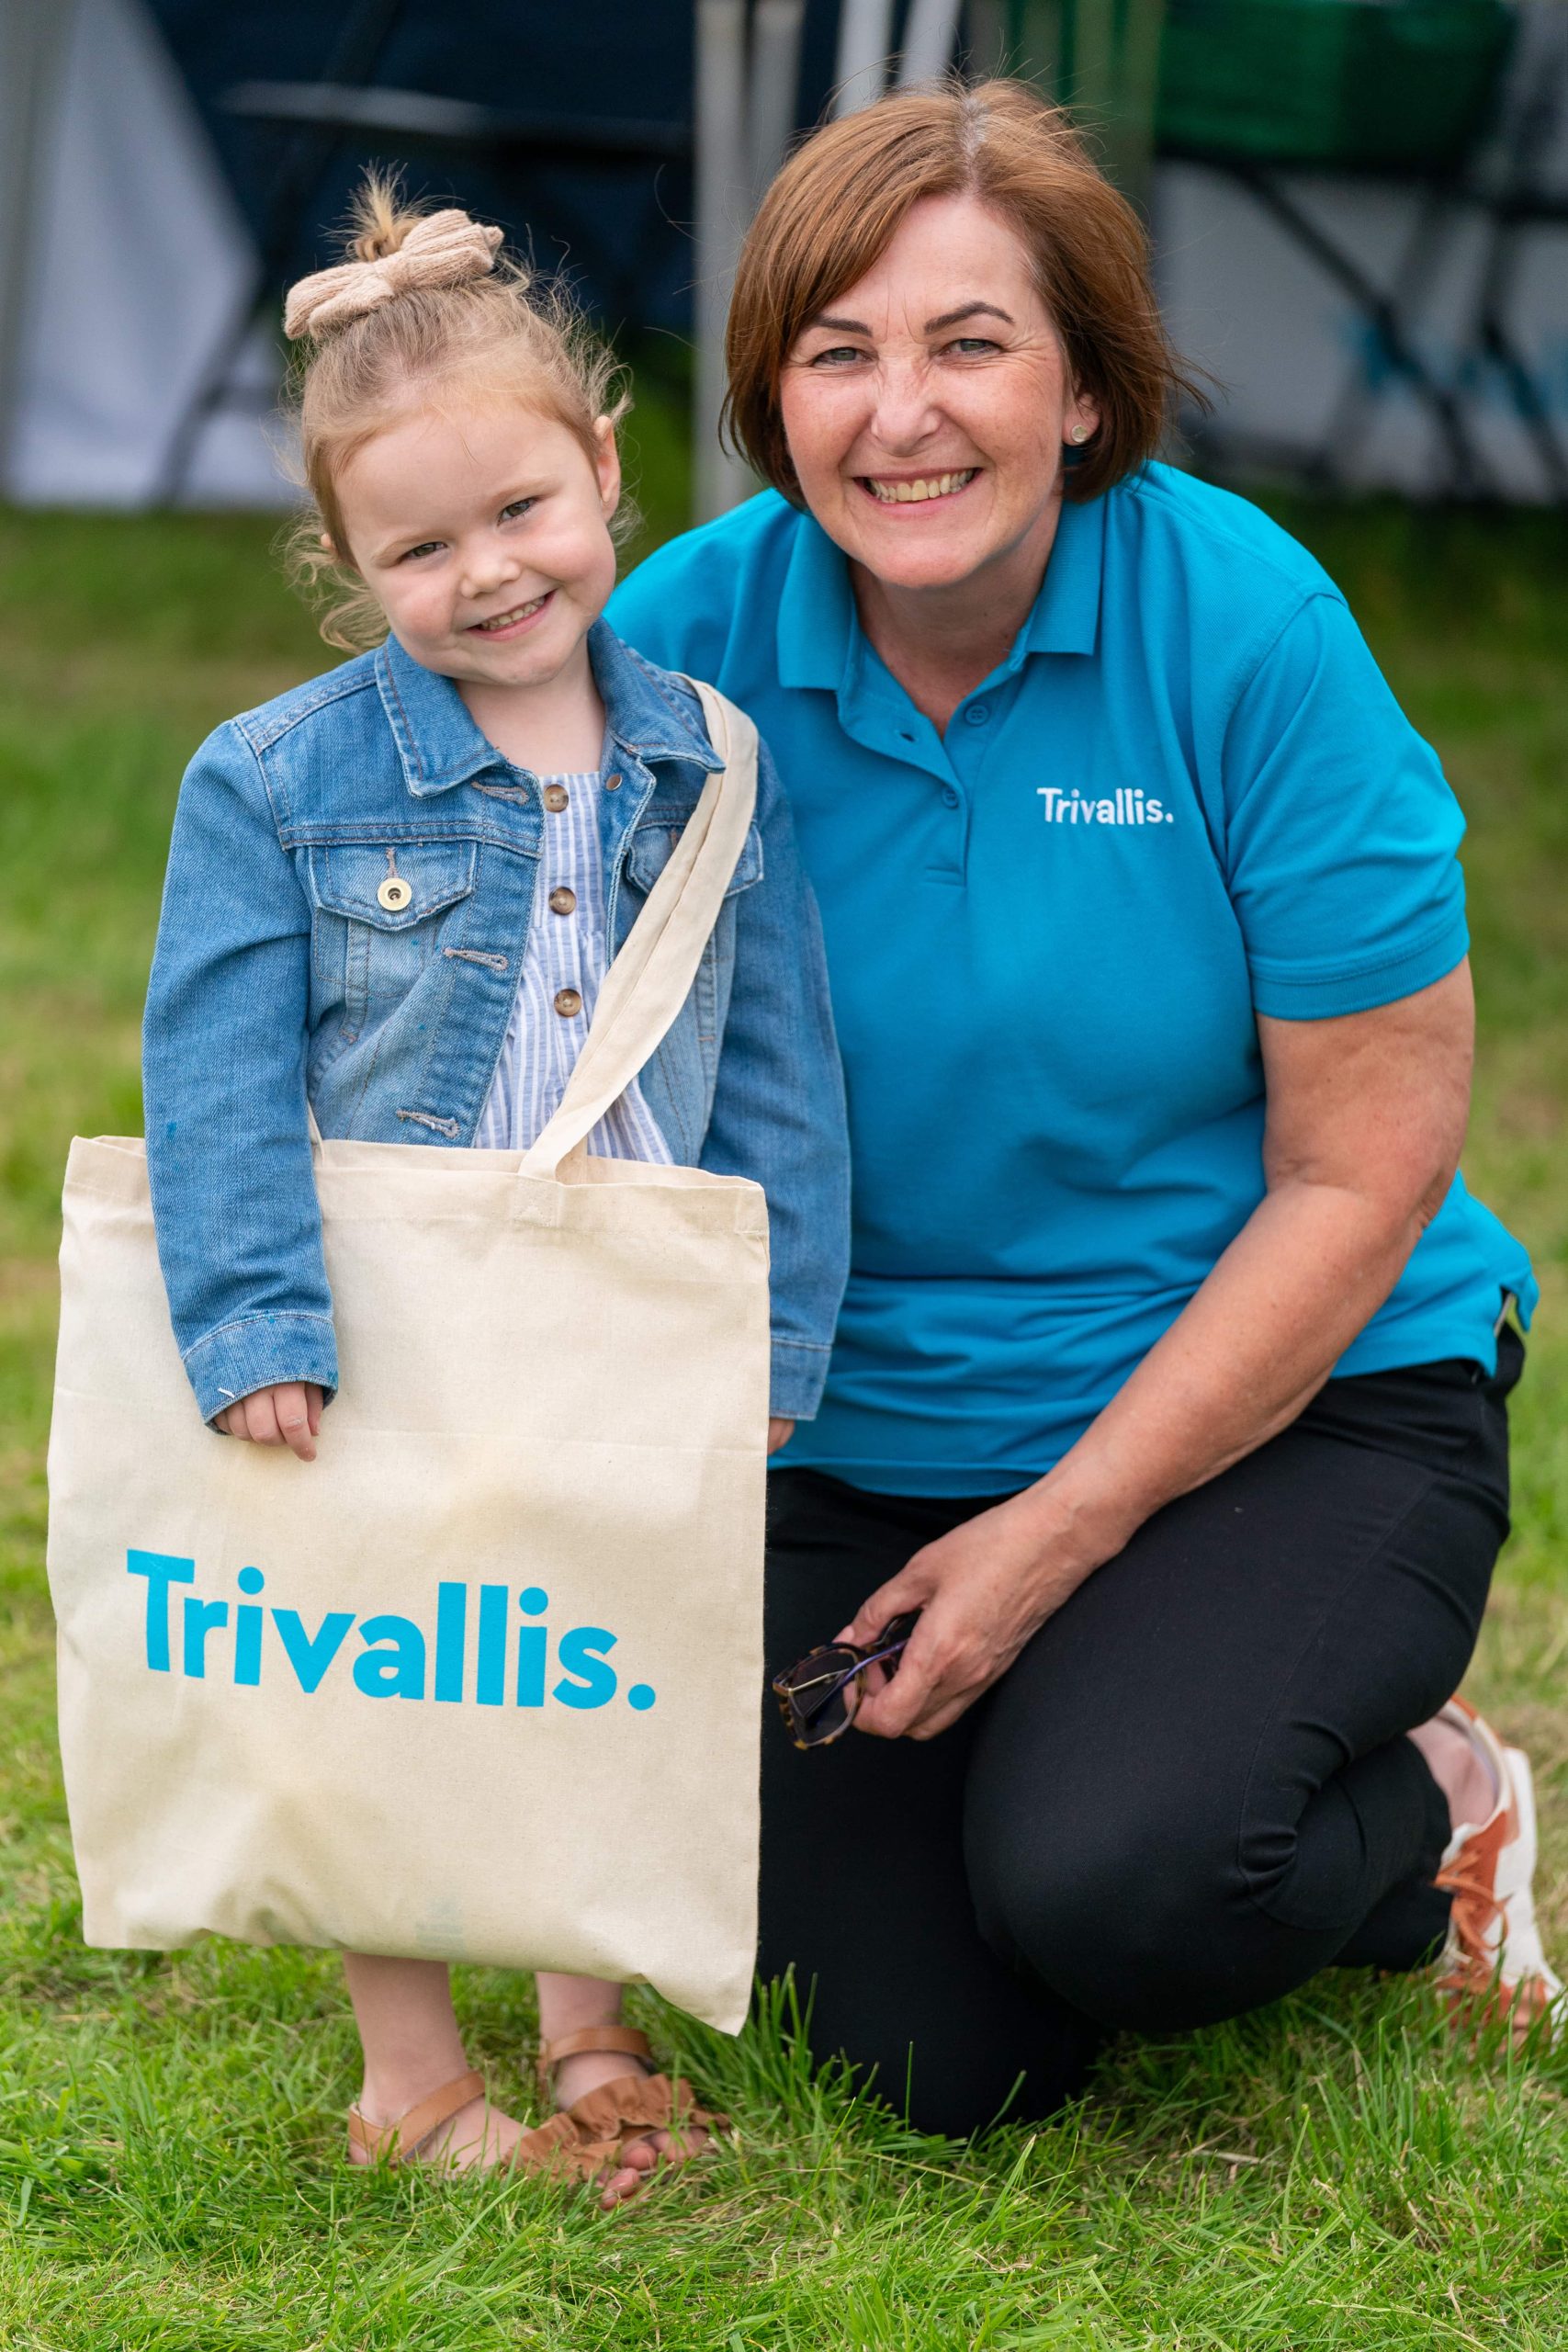 Trivallis Housing Landlord Wales A young girl with a ponytail and a woman in a blue Trivallis shirt are smiling at the camera while kneeling on grass, holding a tote bag with the RCT housing logo.